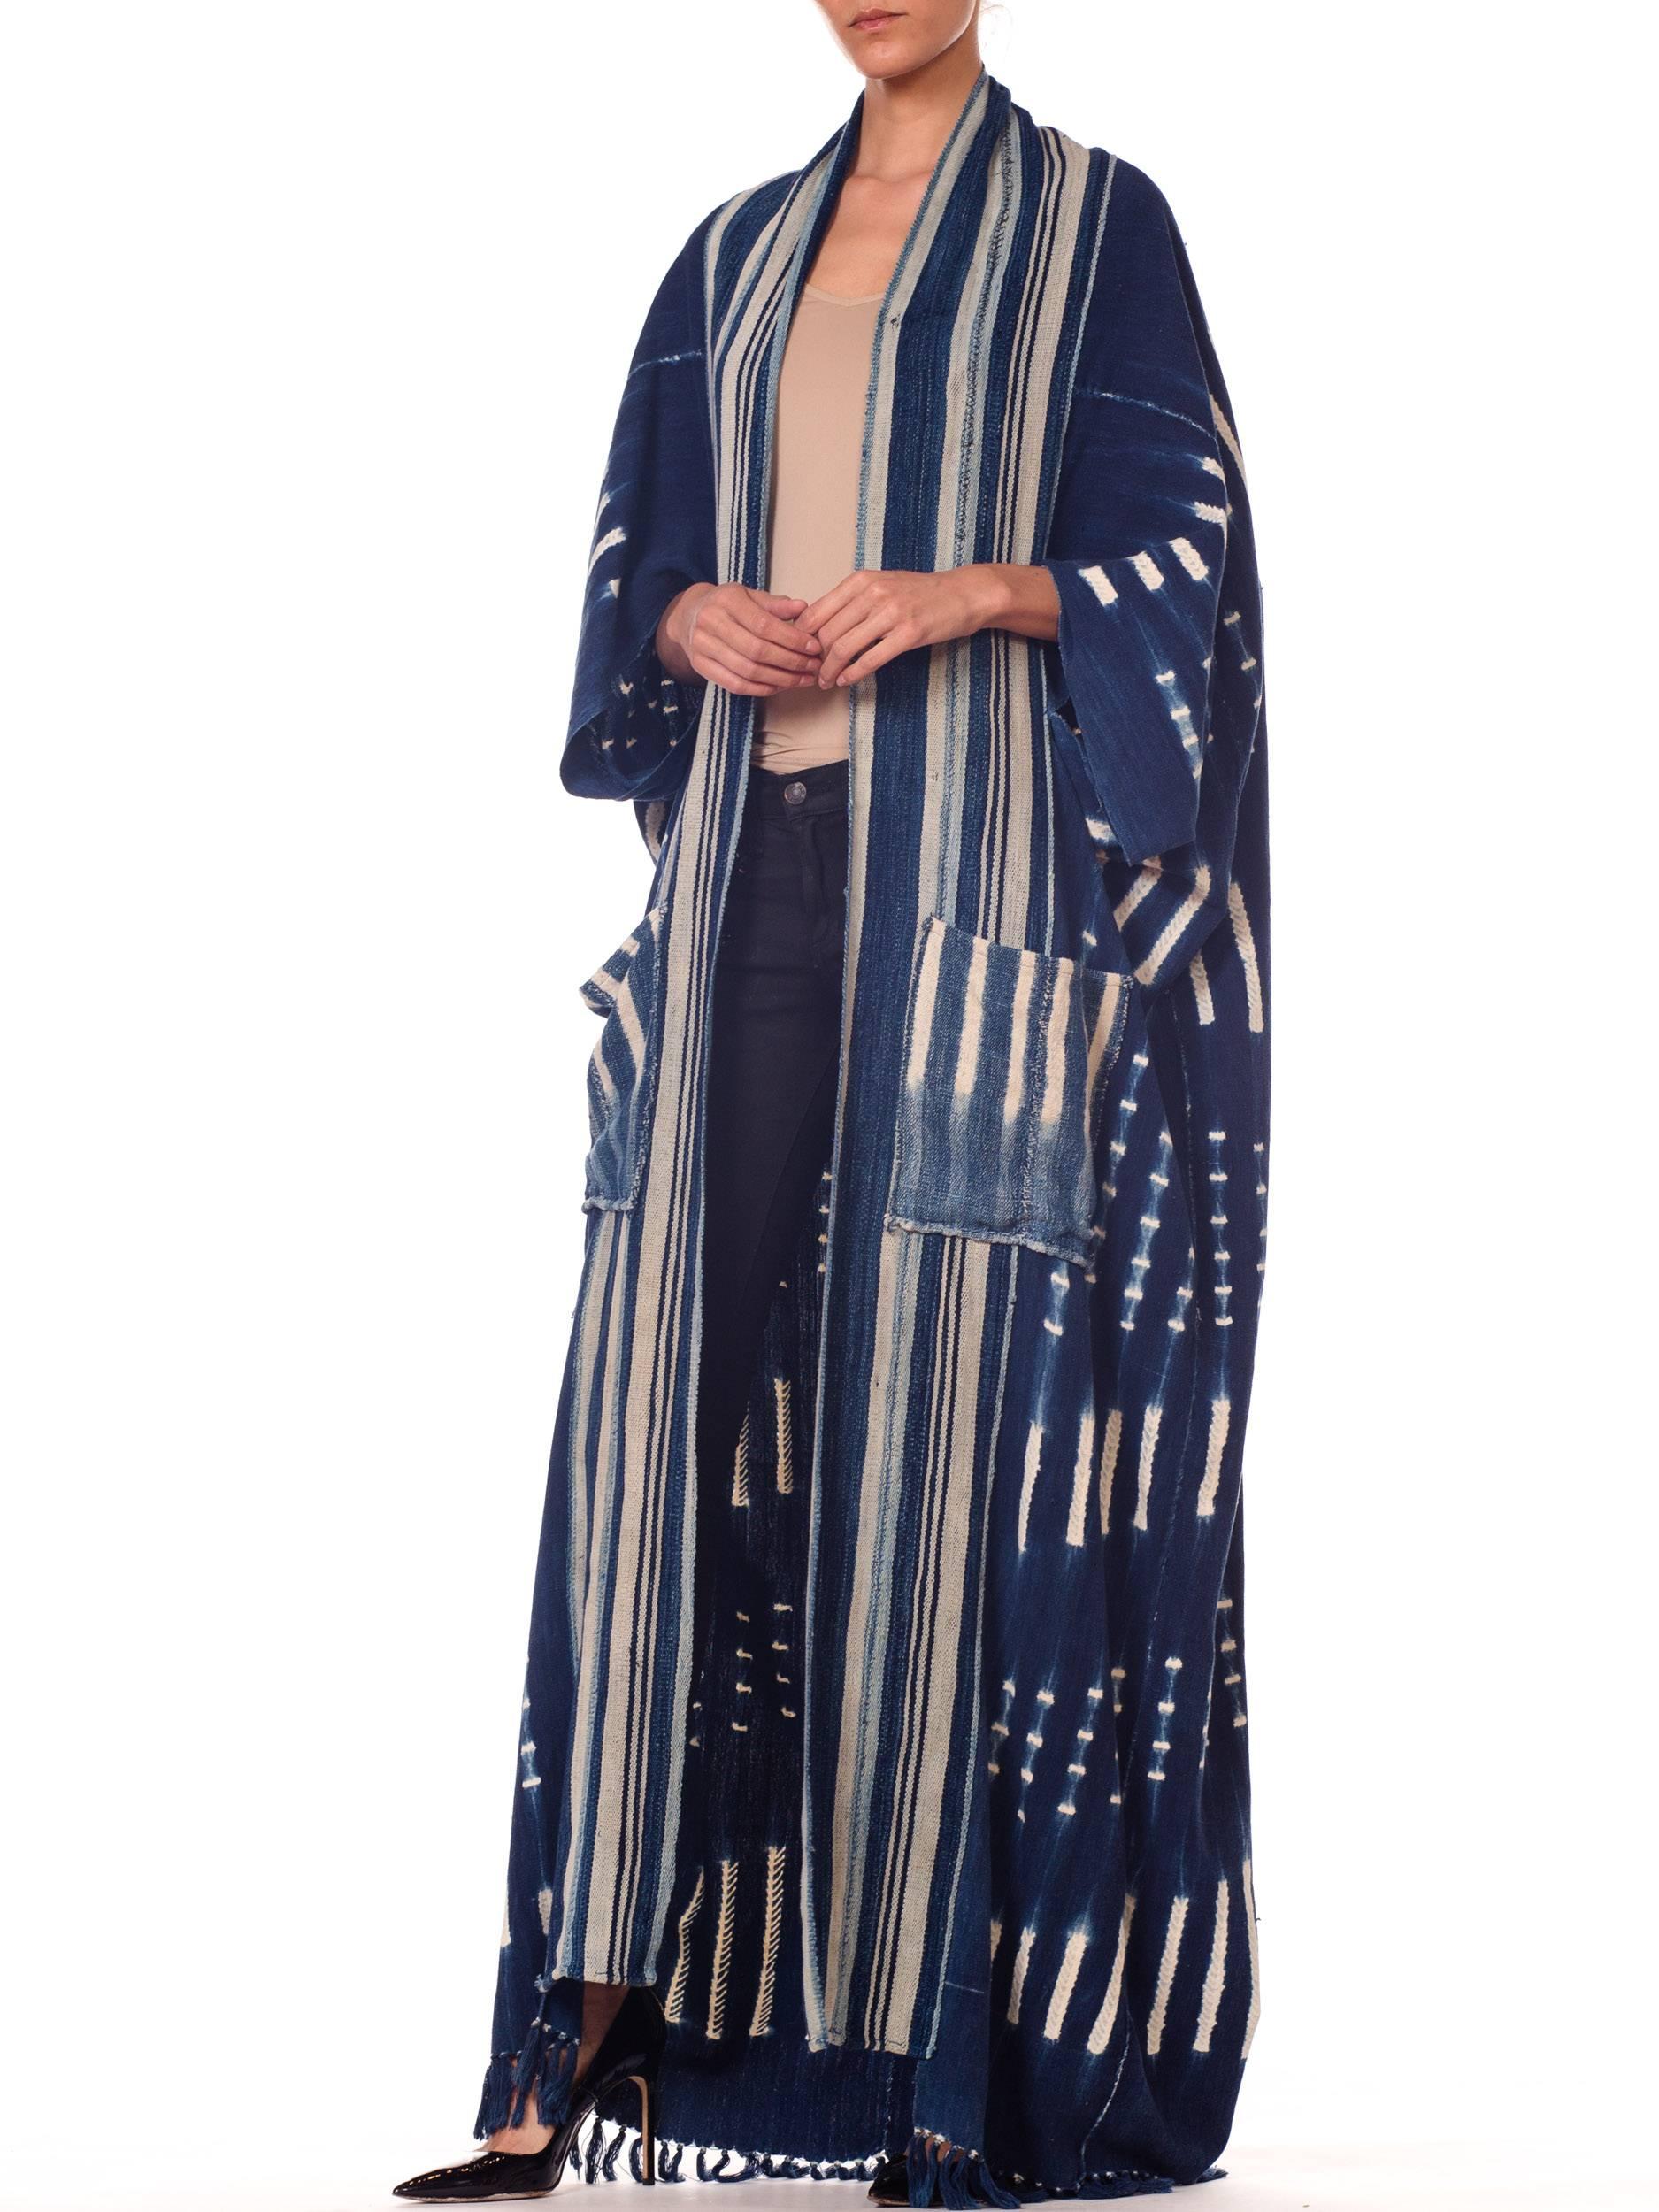 Black Morphew Collection African Handwoven Tie-dye Indigo Robe with Striped Collar